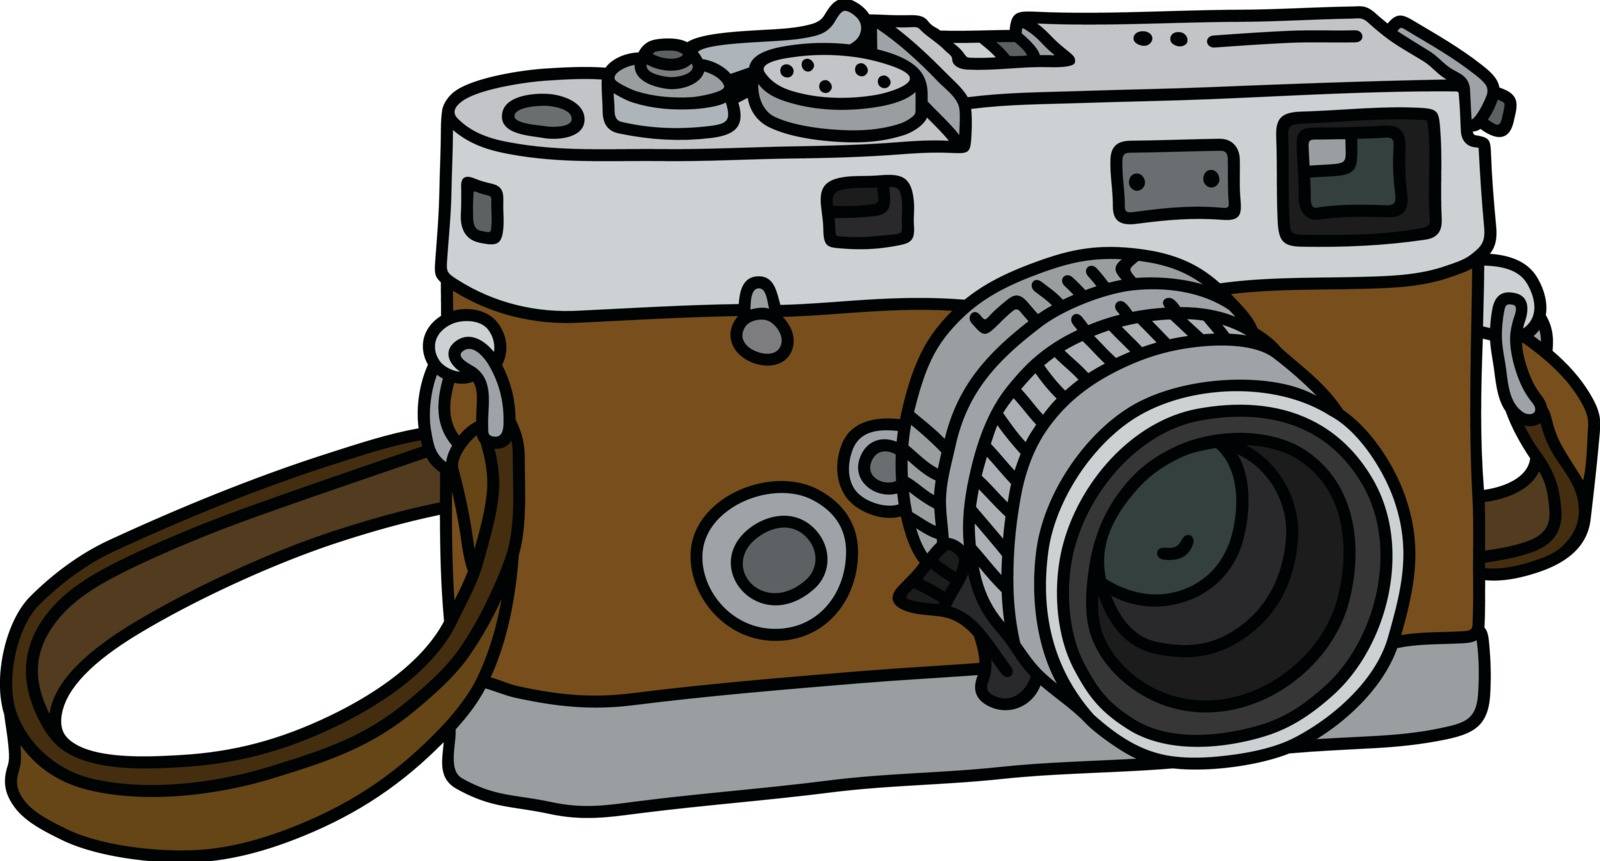 The vector drawing of a retro photographic camera